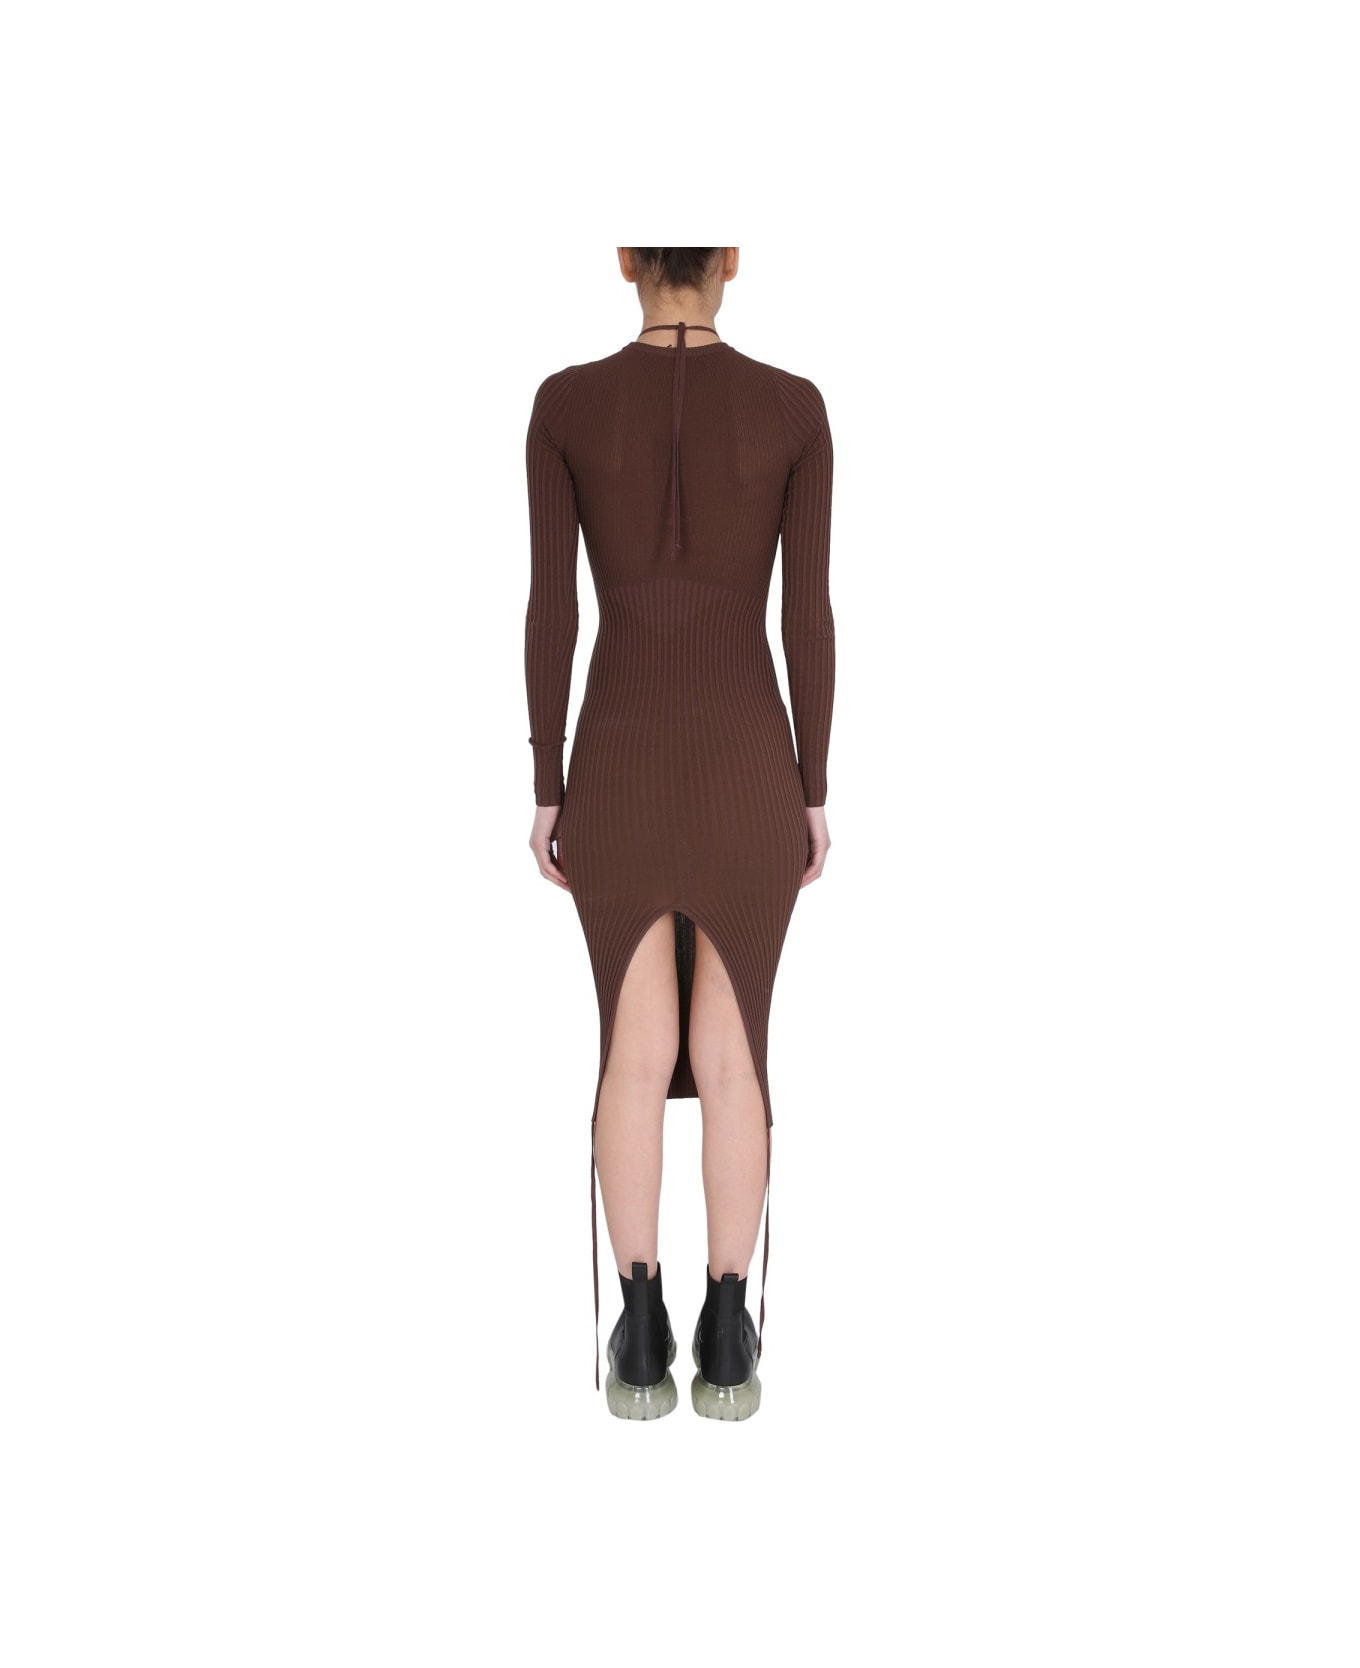 ANDREĀDAMO Dress With Cut Out Detail - BROWN